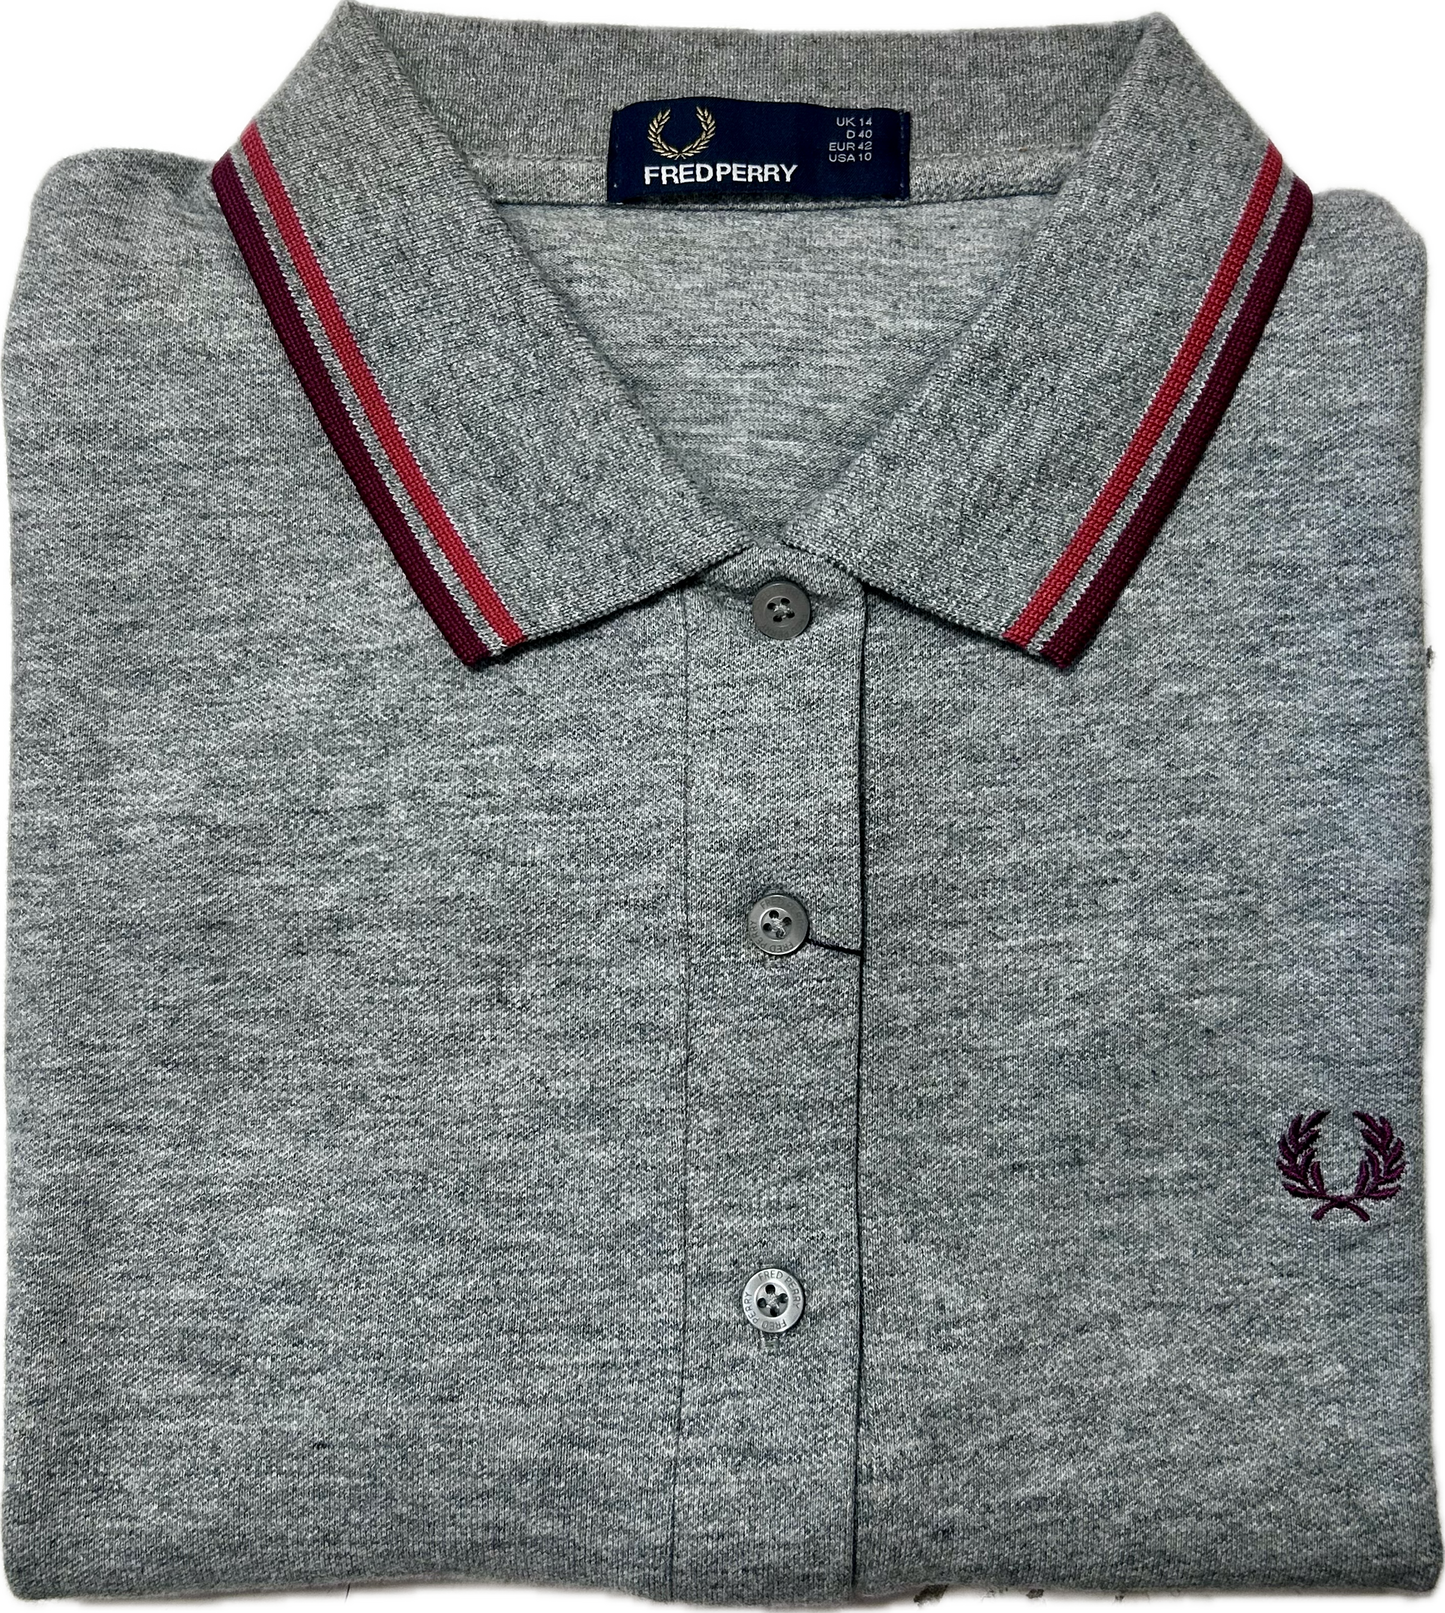 LADIES TWIN TIPPED FRED PERRY SHIRT (VINTAGE STEEL MARBLE/MAROON/RED)